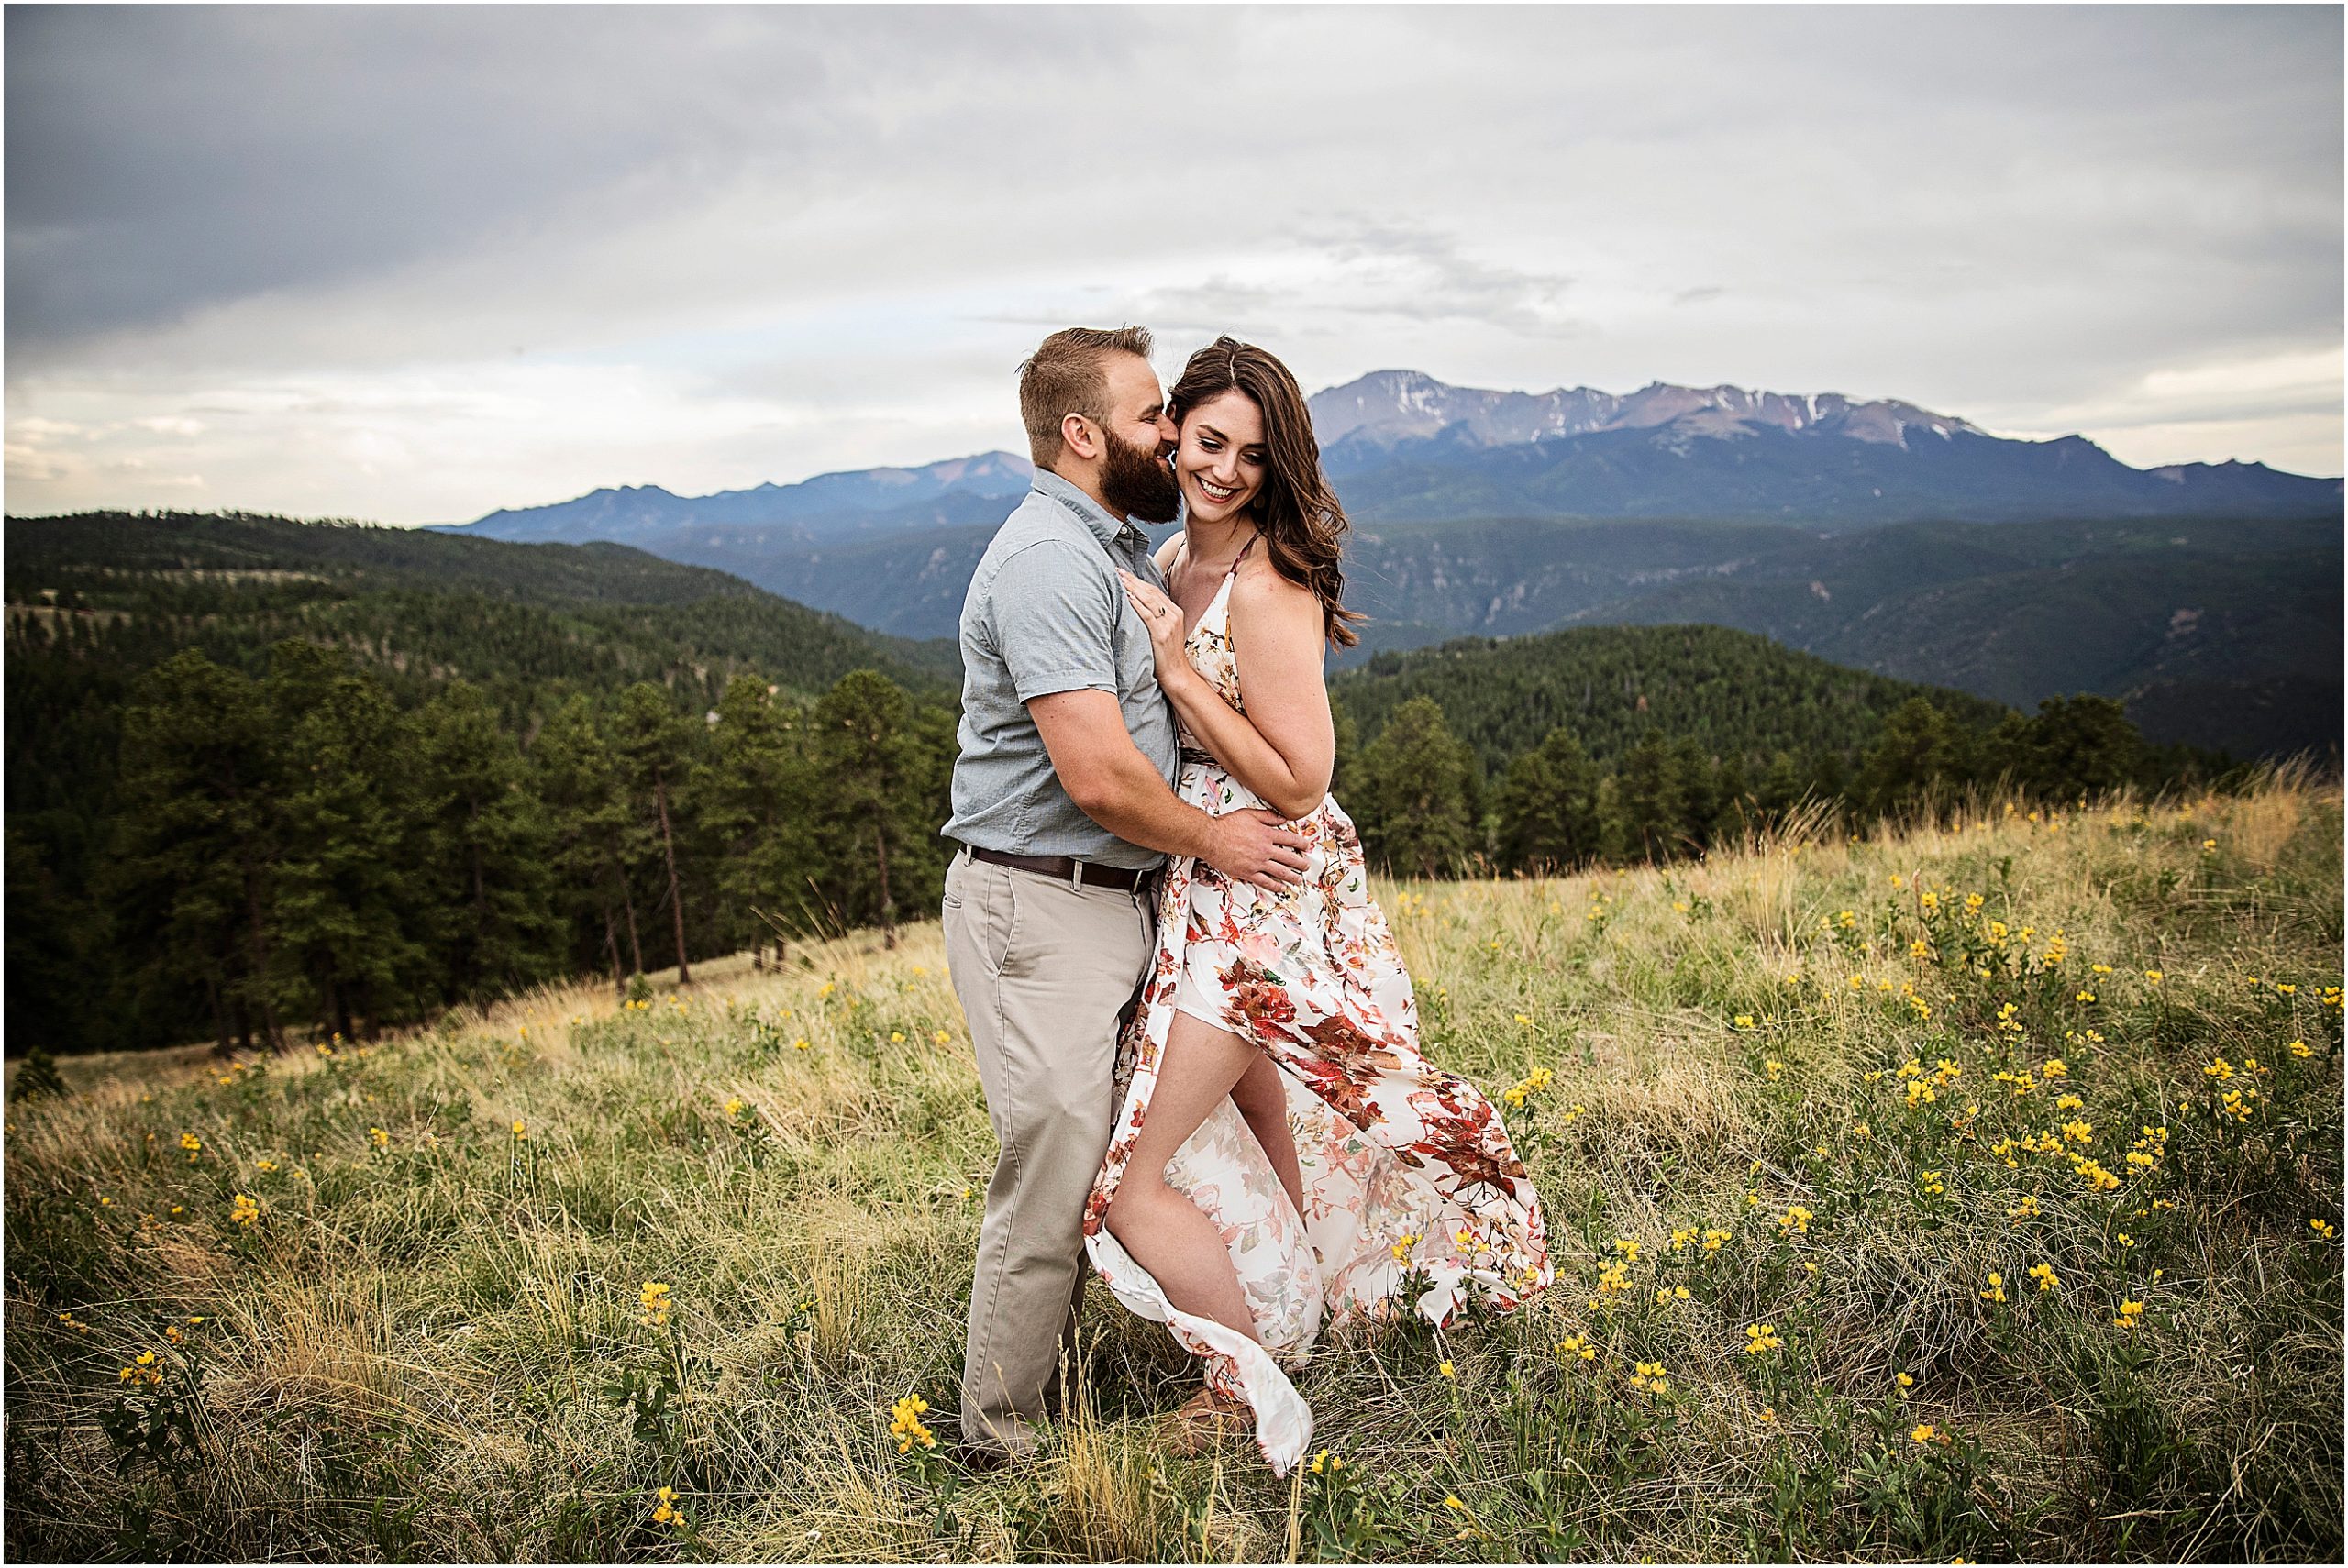 Taylor and Paige stand in a field of yellow wild flowers with lovely views of Pikes Peak